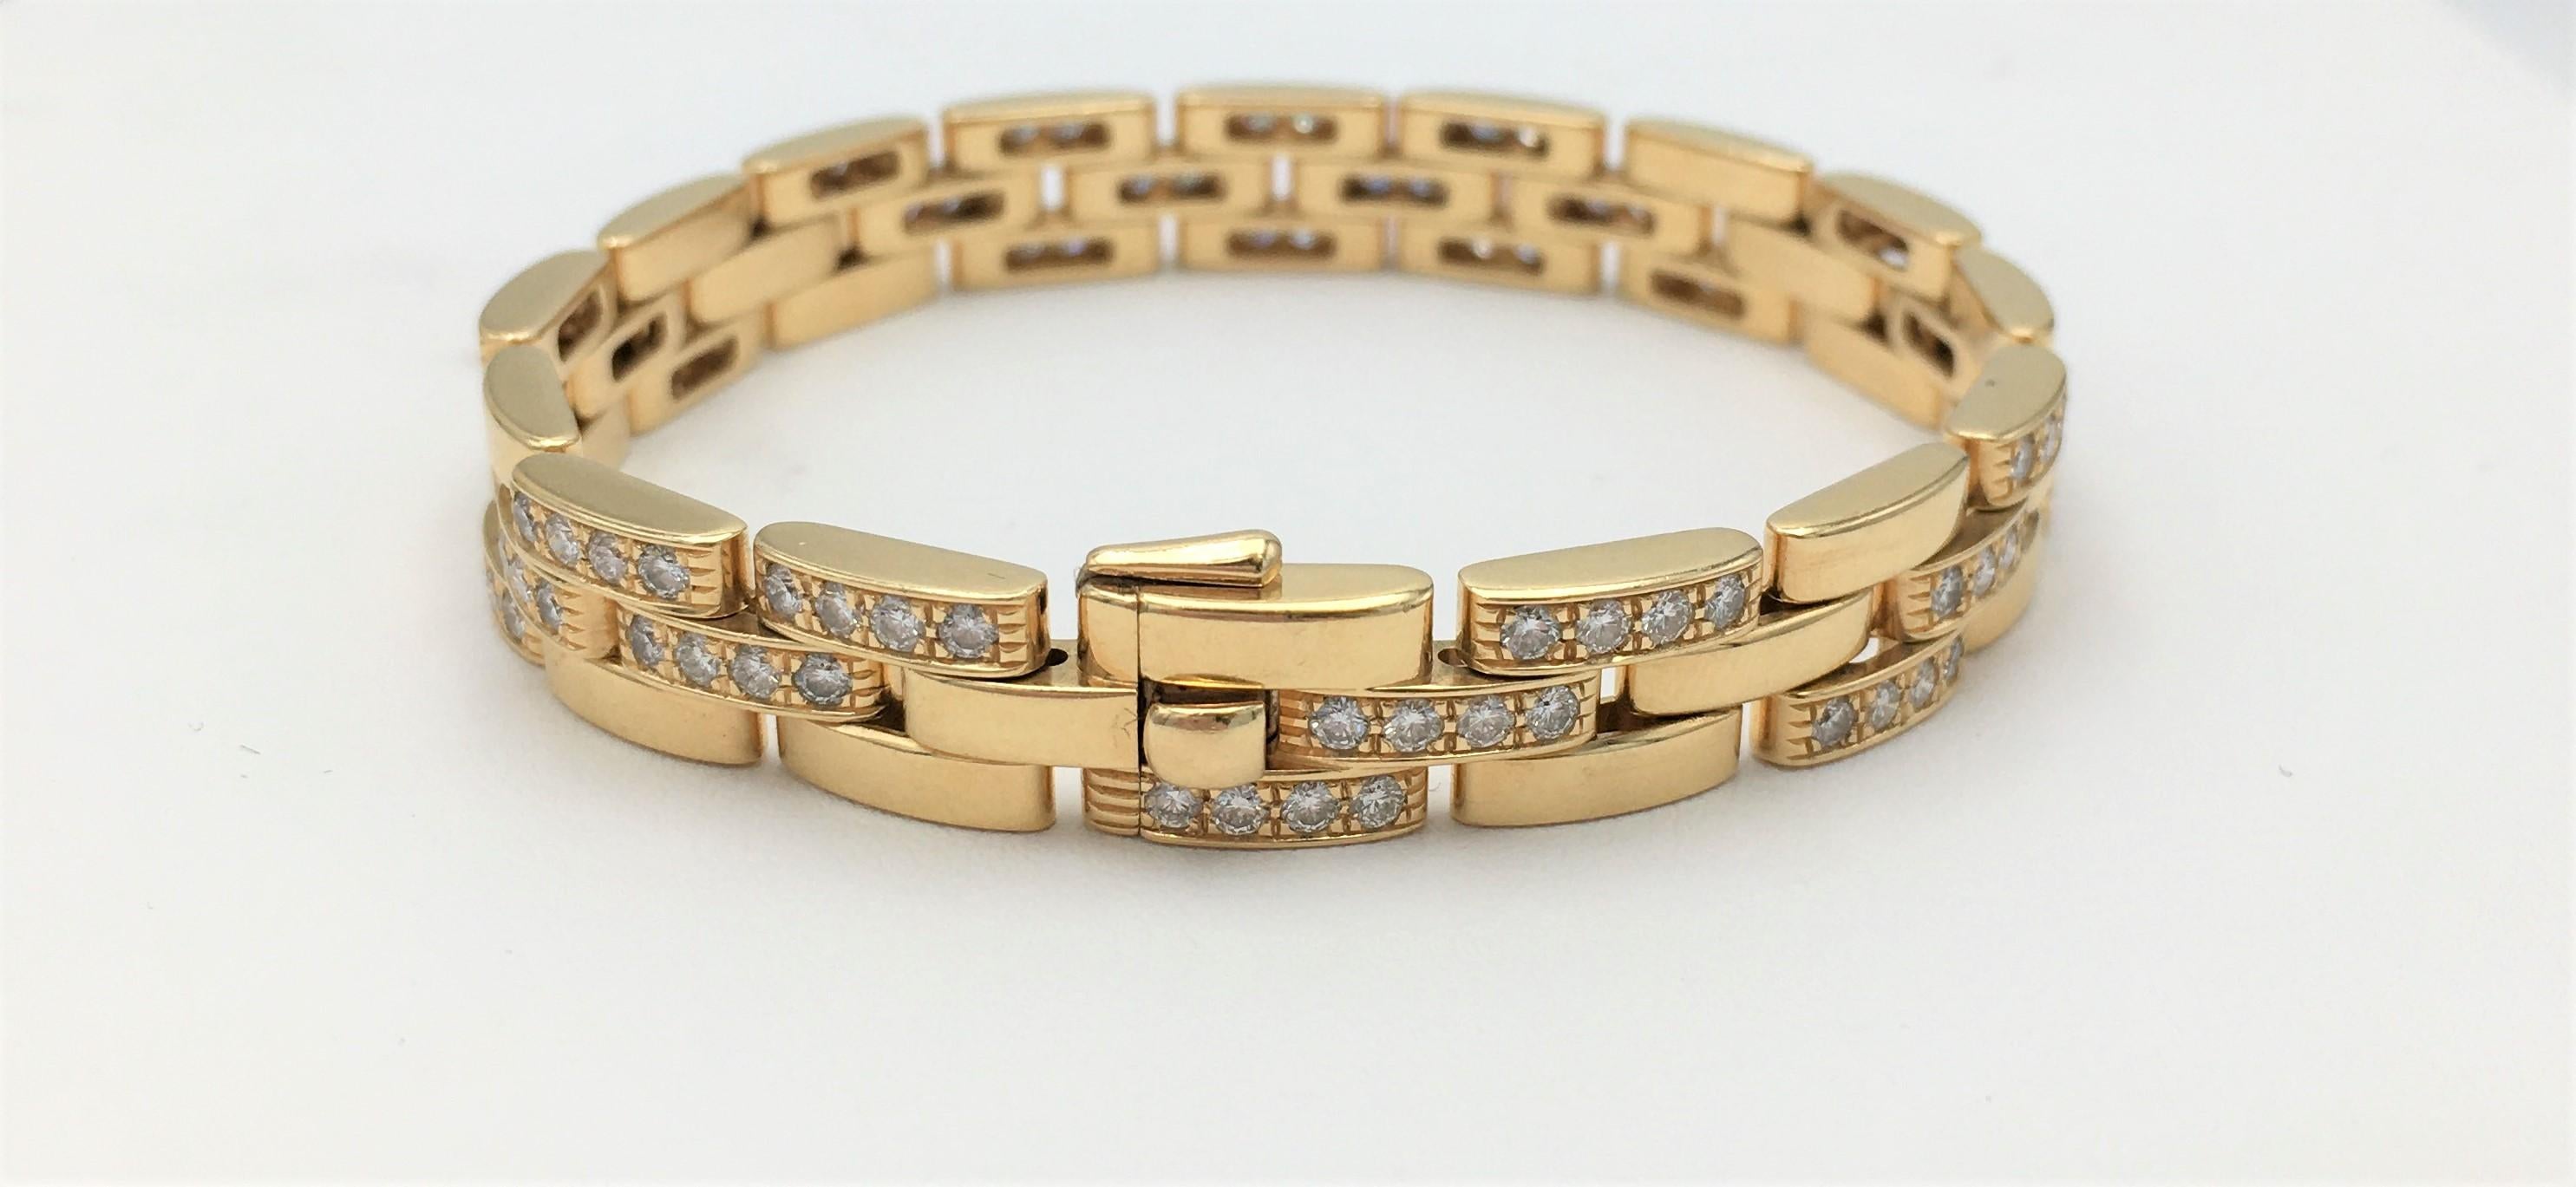 Authentic Cartier 'Maillon Panthère' three-row bracelet crafted in 18 karat yellow gold and set with an estimated 3.50 carats of high quality round brilliant cut diamonds. Signed Cartier, 750, with hallmarks. Cartier signature is rubbed, but visible